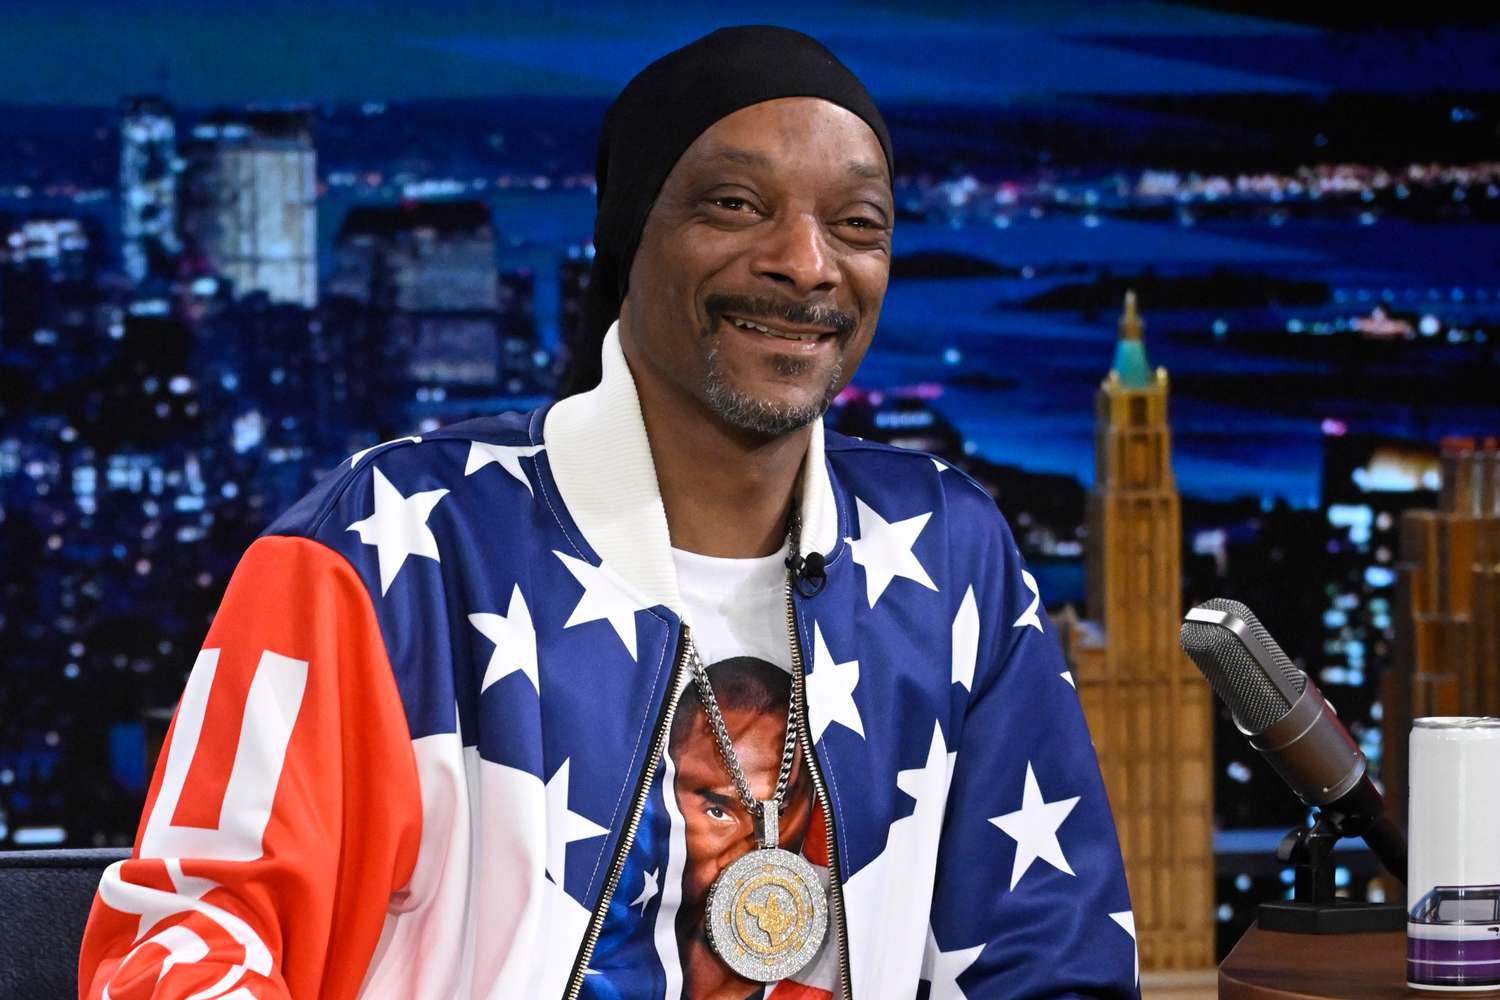 Snoop Dogg Hopes 'The Voice’ Gig Will Show 'I Really Understand Music': 'I'm the People's Champ'